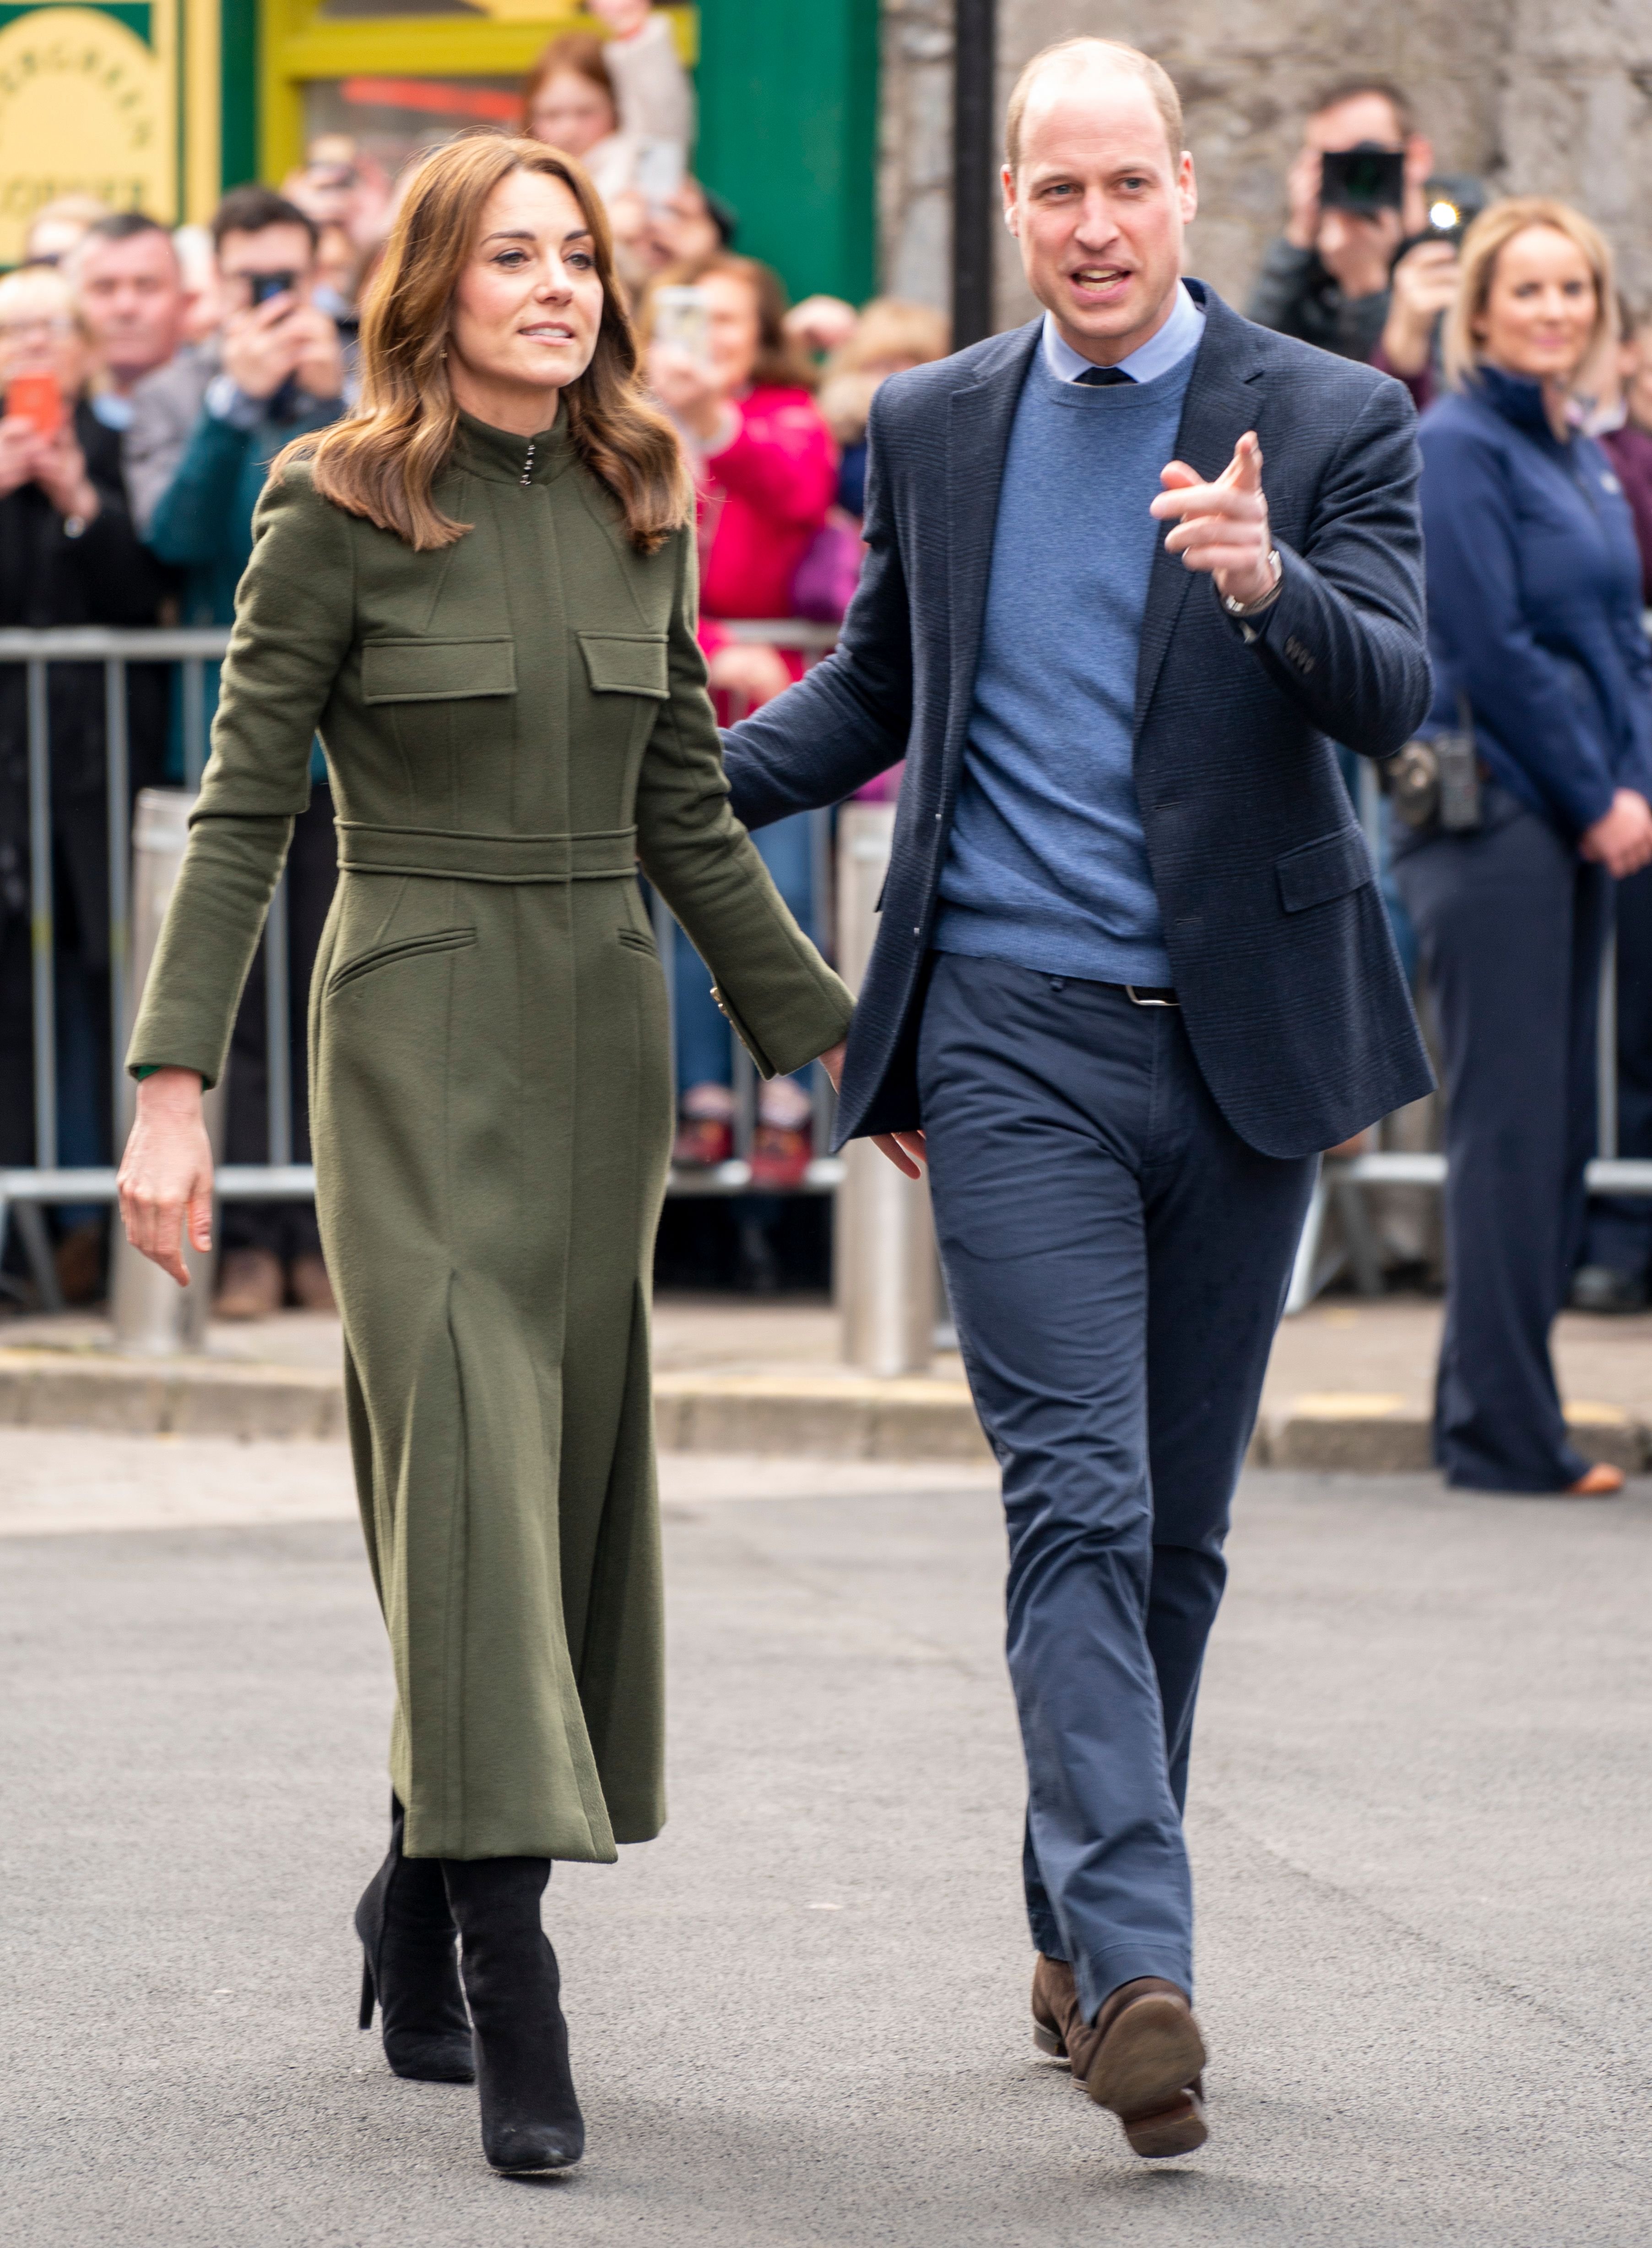 Prince William and Kate Middleton at King Street during day three of their visit to Ireland on March 5, 2020 in Galway, Ireland. | Source: Getty Images